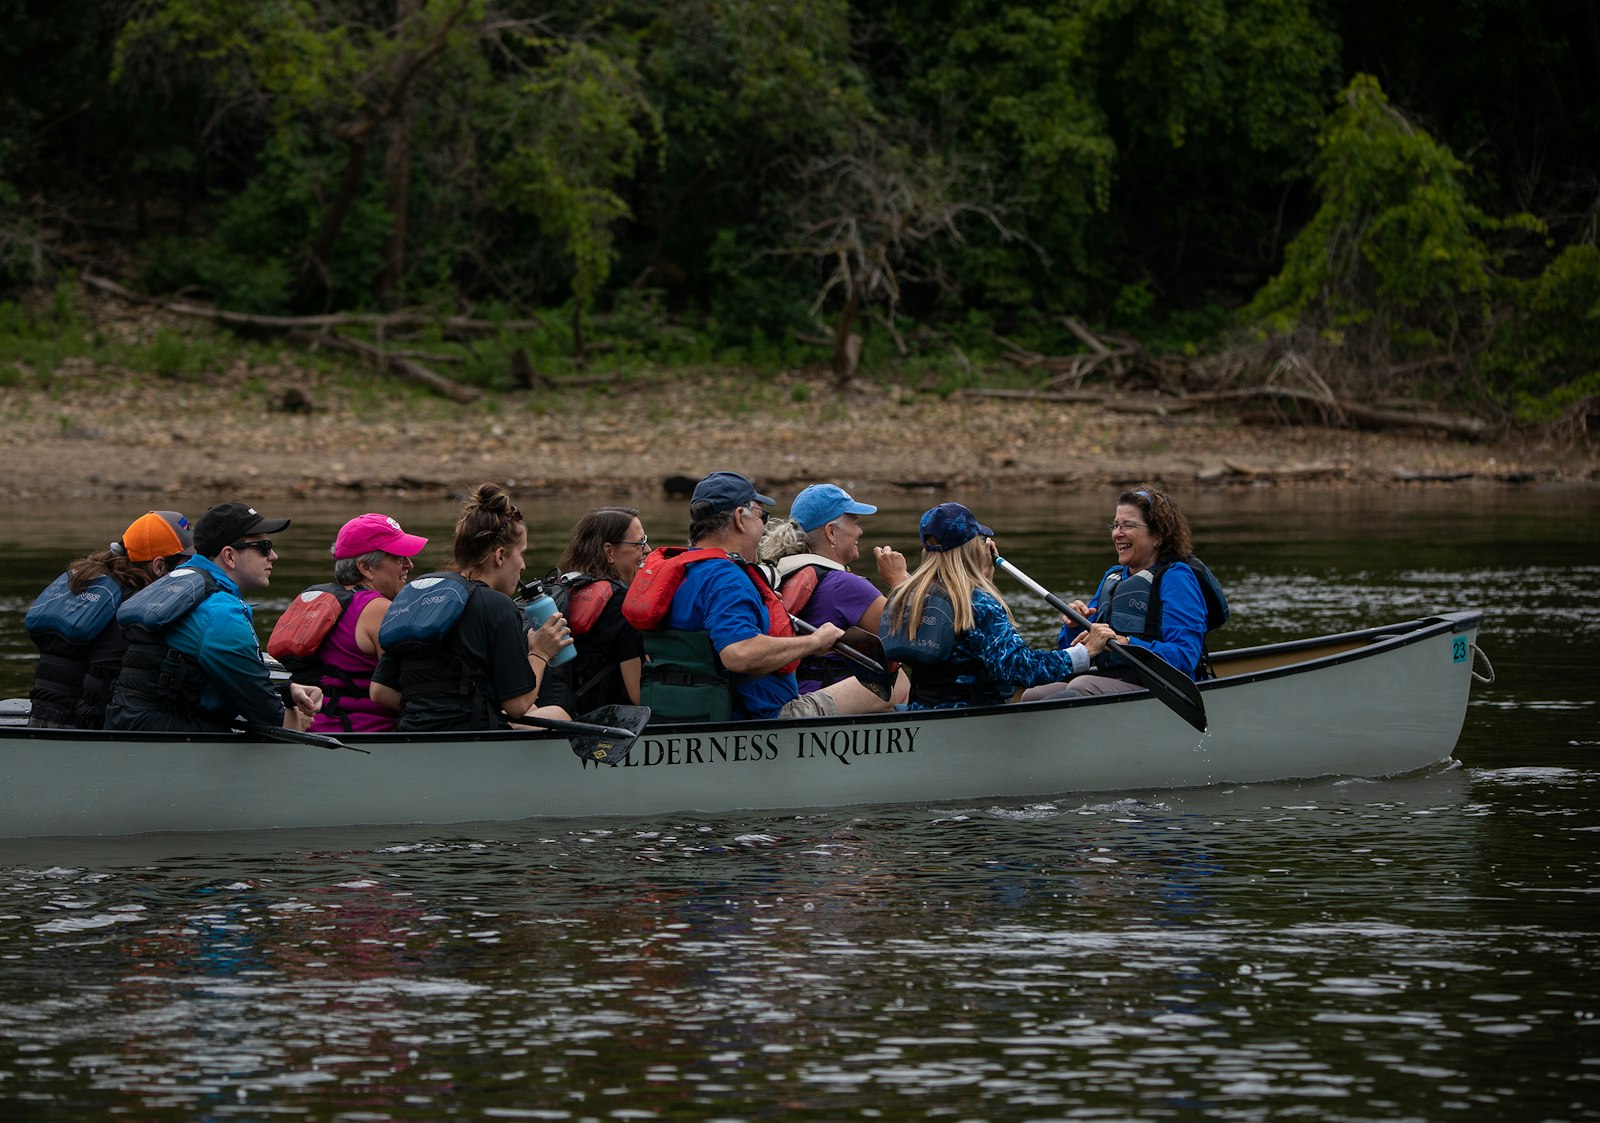 A group of people sit in a canoe, on a river, and smile